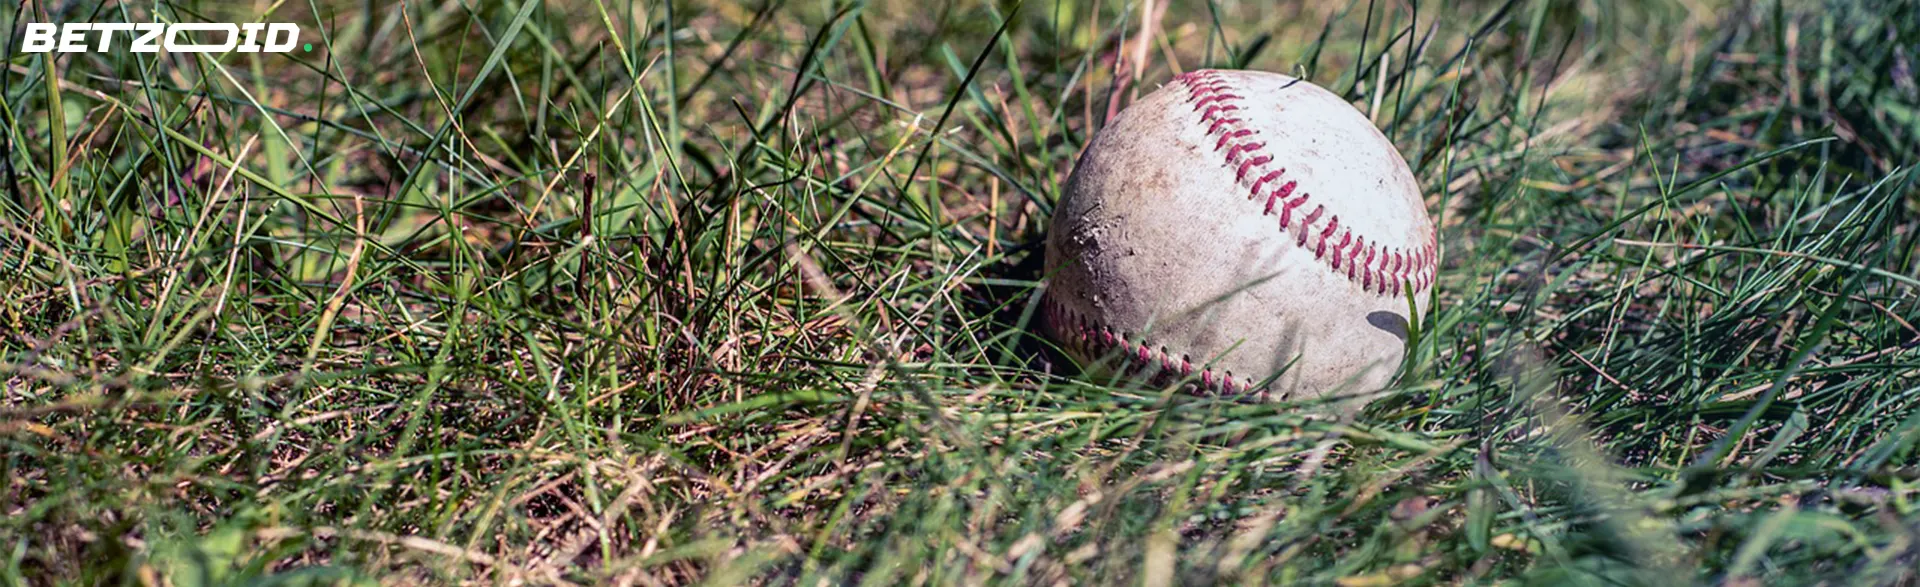 Baseball lies in the grass, subtly blending into the natural environment.